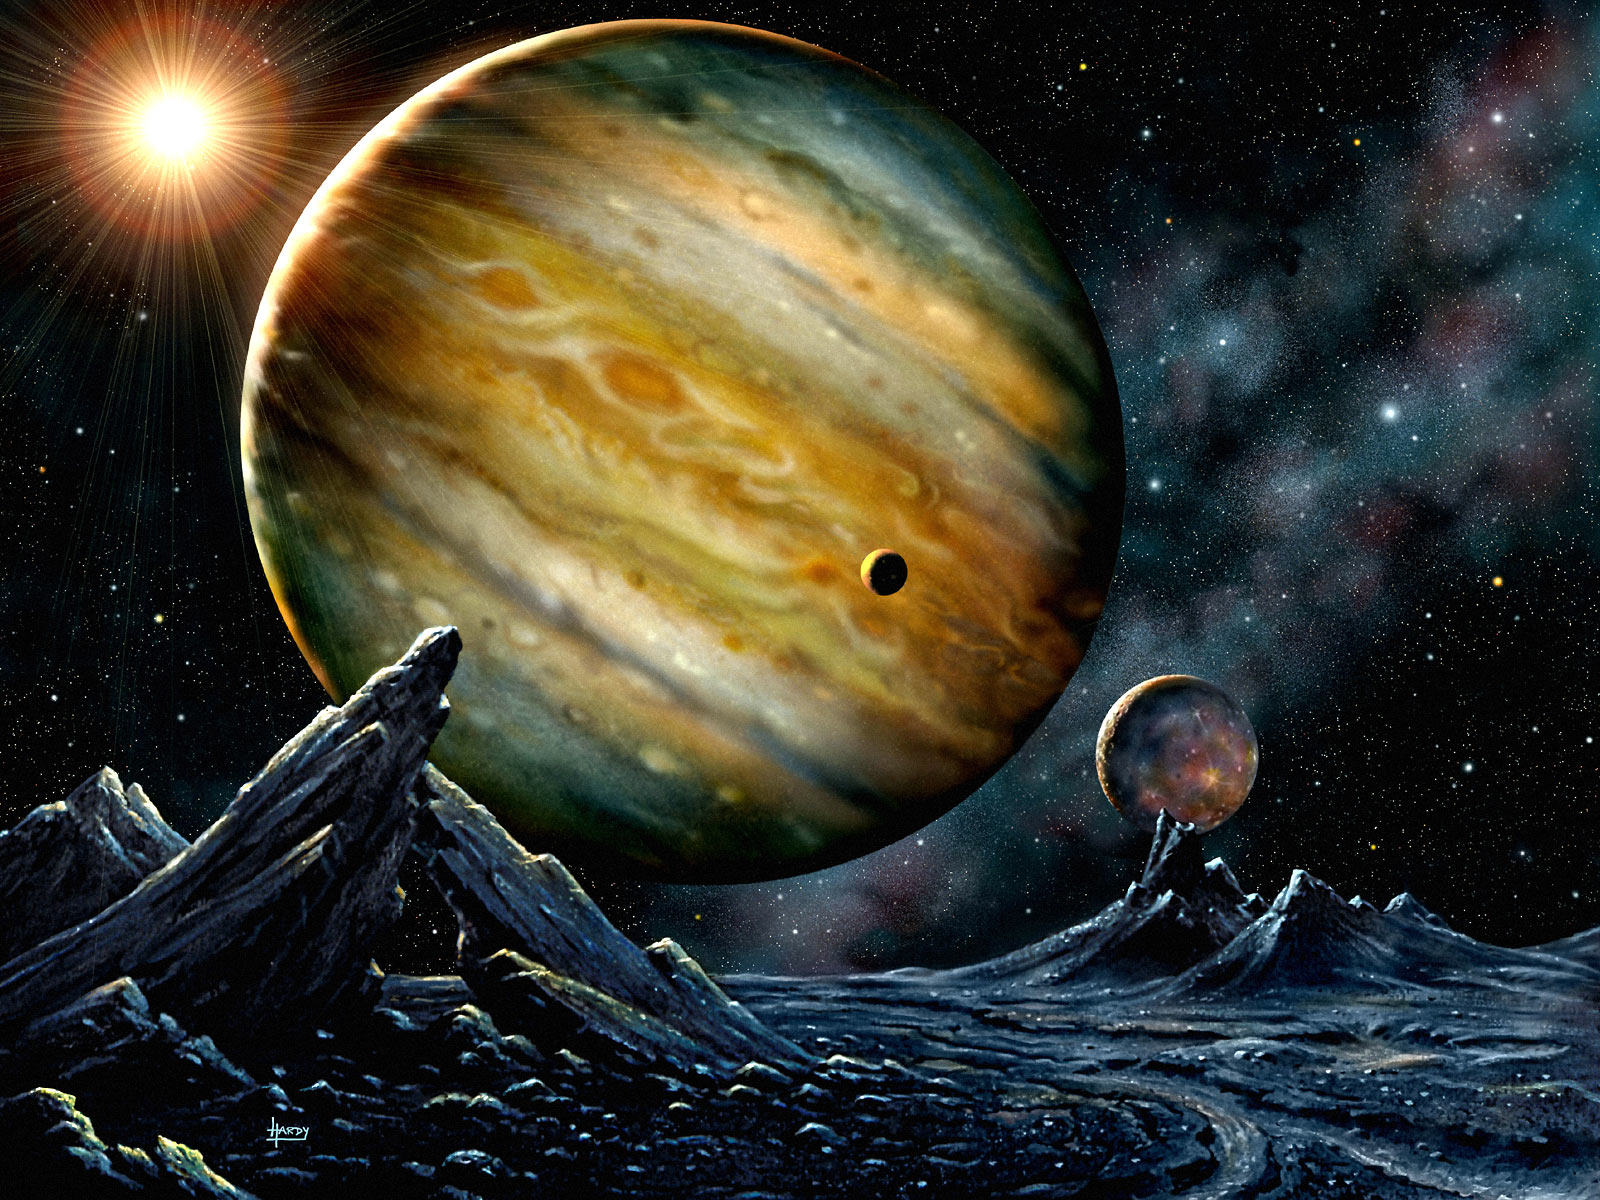 Possible_Scene_from_a_Moon_of_the_Extrasolar_Jupiter-like_Planet